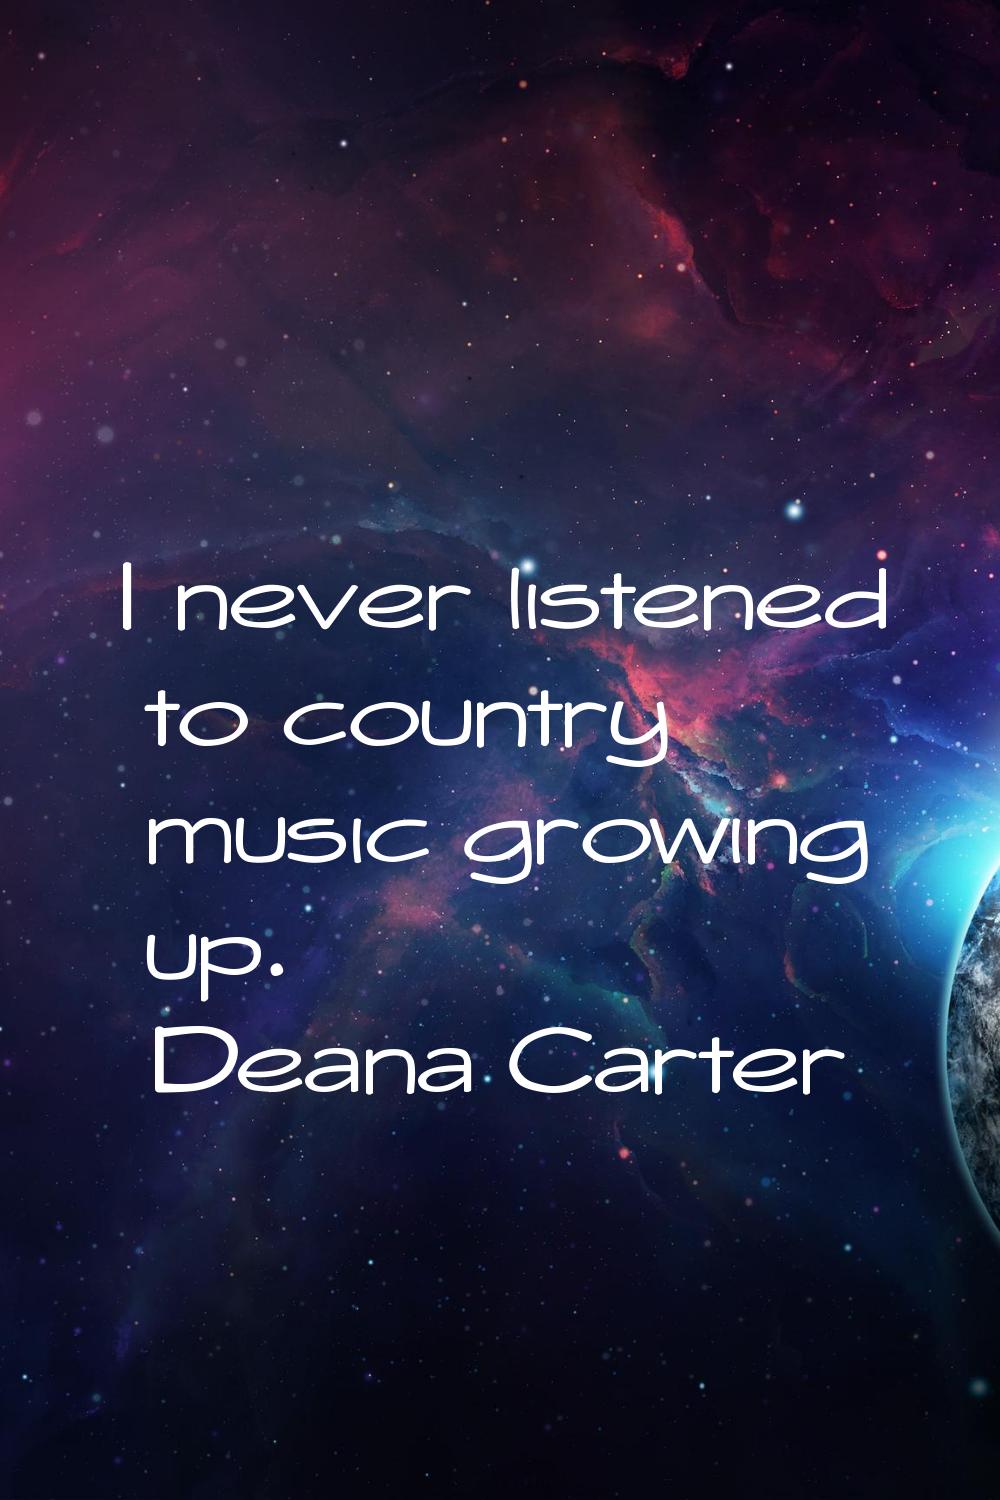 I never listened to country music growing up.